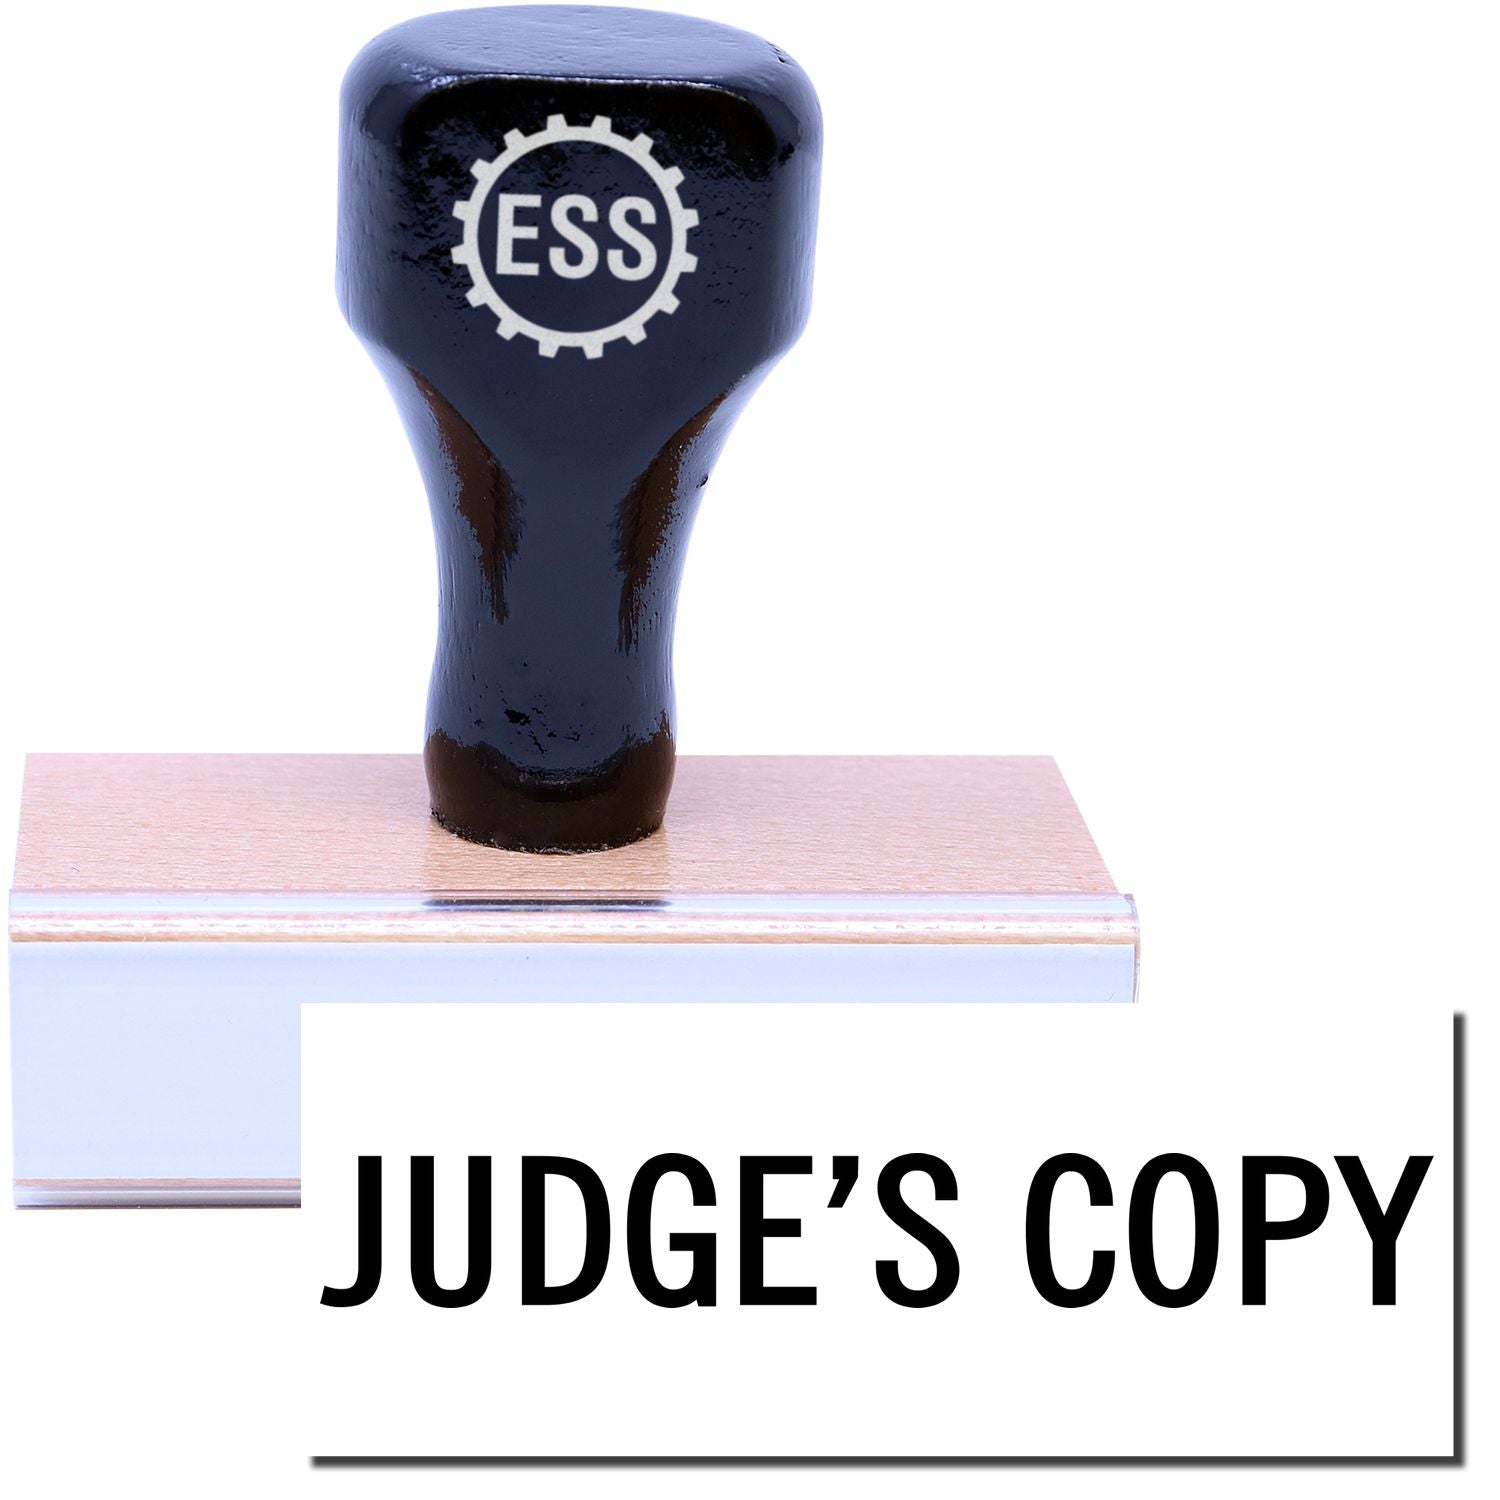 A stock office rubber stamp with a stamped image showing how the text "JUDGE'S COPY" in a large font is displayed after stamping.